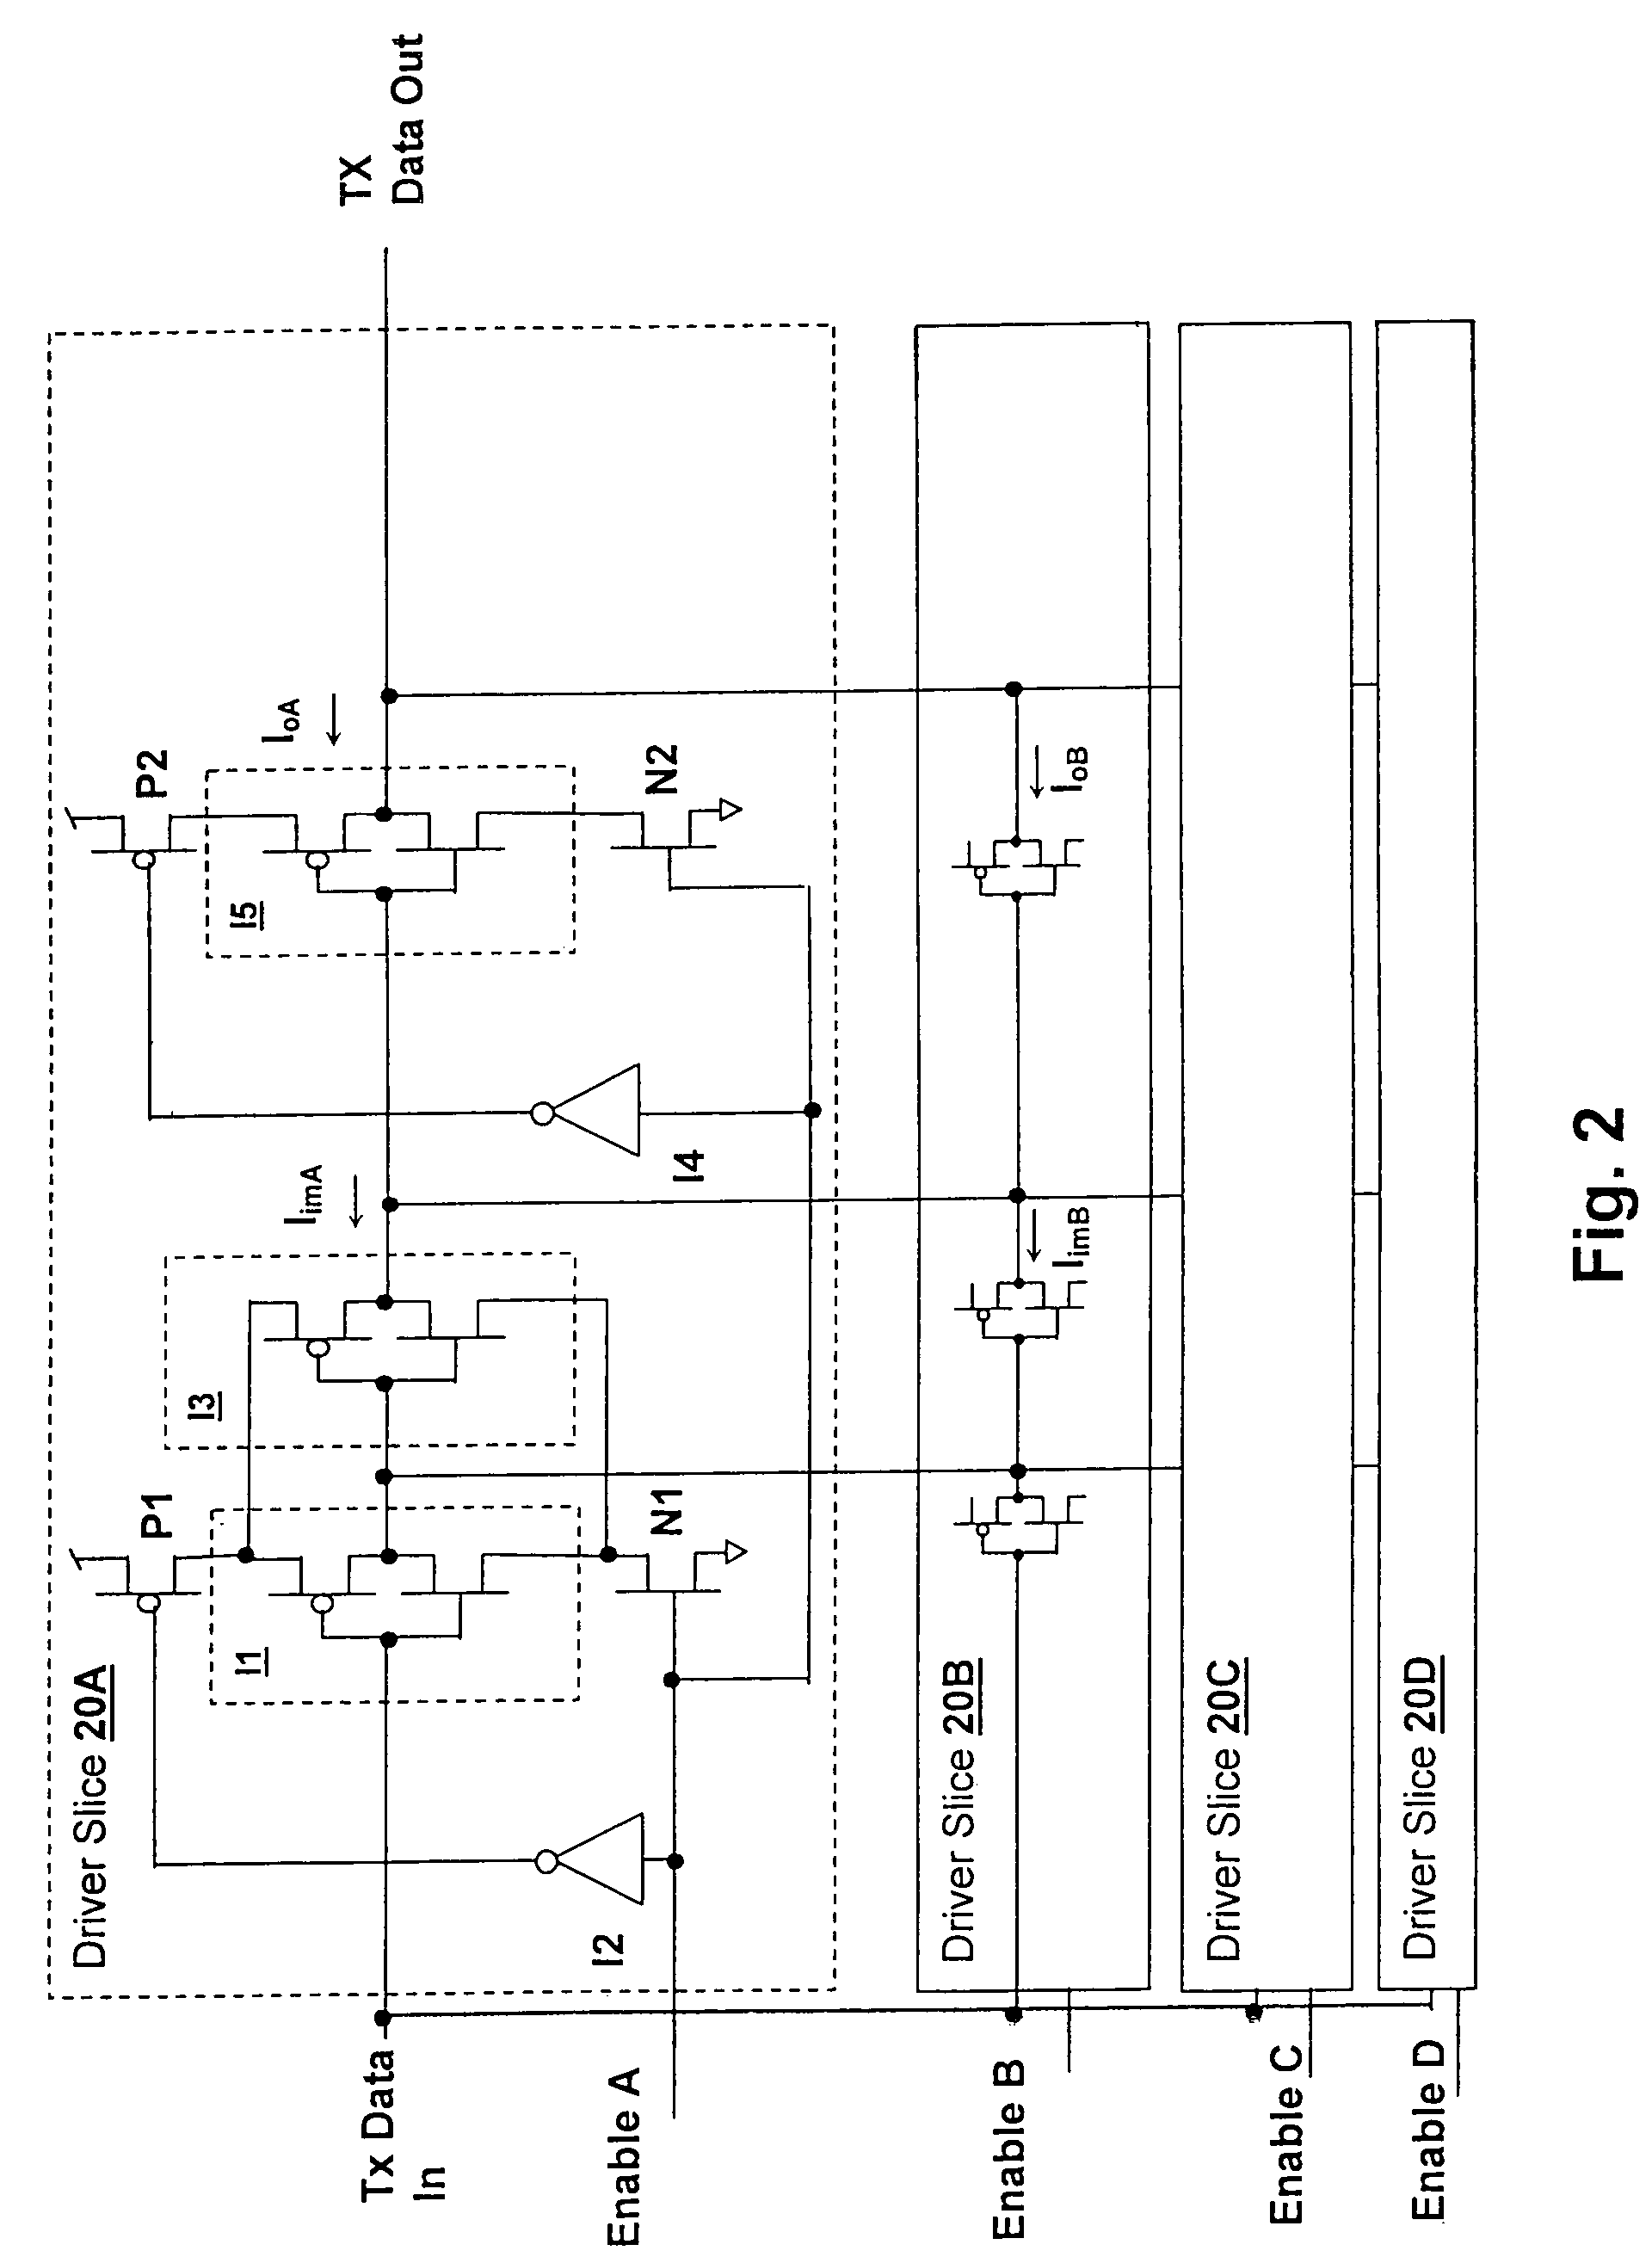 Digital transmission circuit and method providing selectable power consumption via multiple weighted drive slices